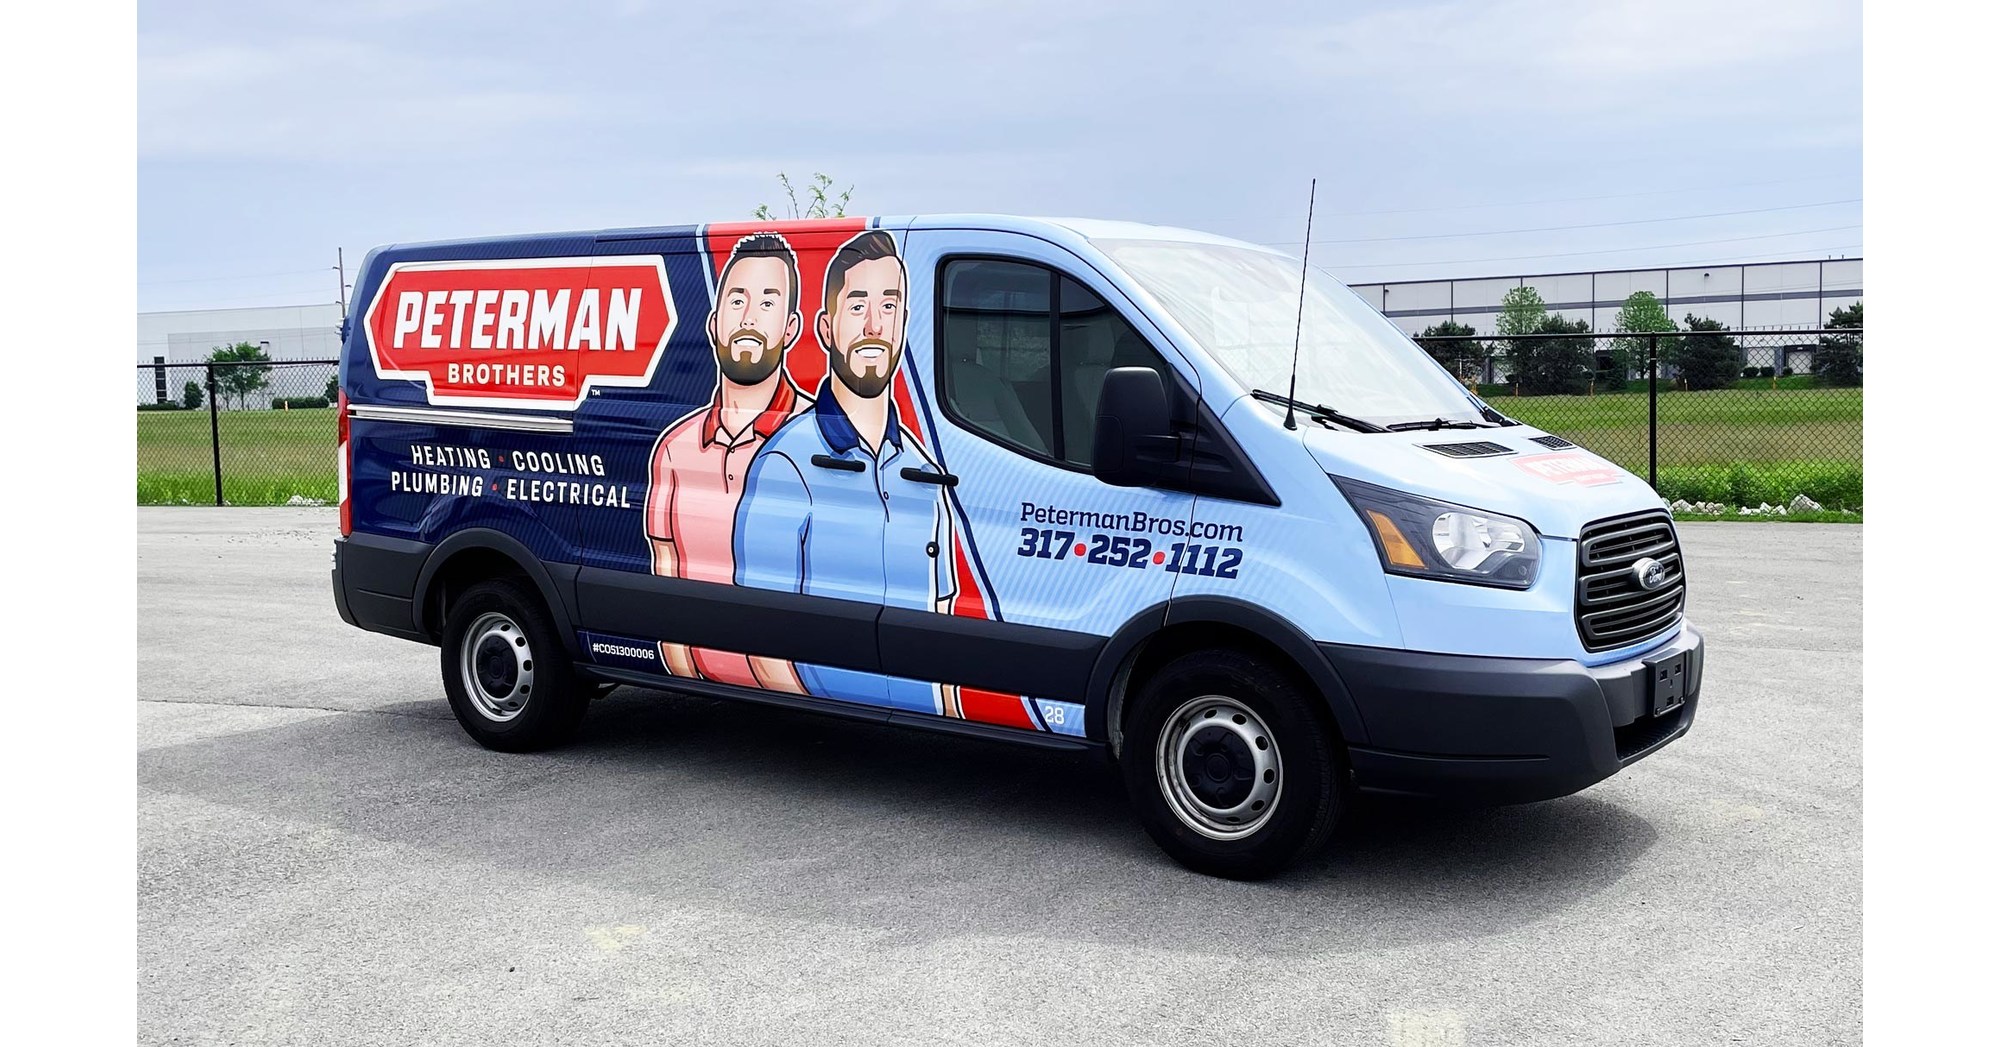 Peterman Brothers showcases Christmas spirit with free furnace giveaway